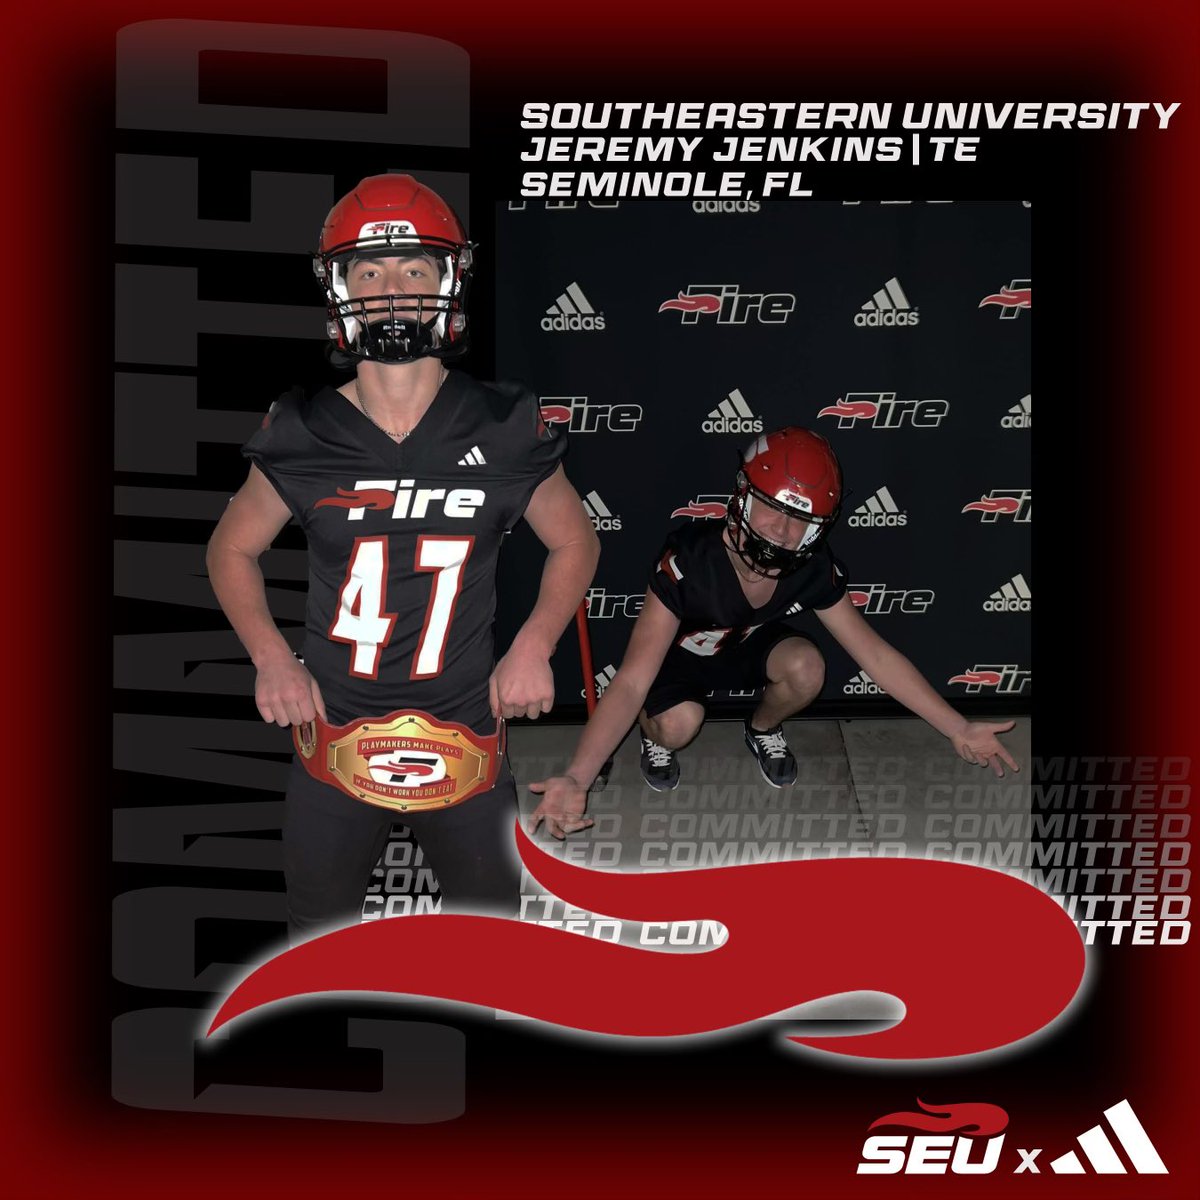 Blessed to officially announce that I’m committed to Southeastern University. Excited to continue my football journey. @OsceolaFHS_FB @Cody_Montgo13 @SEUFireFootball @Coach_Waugh